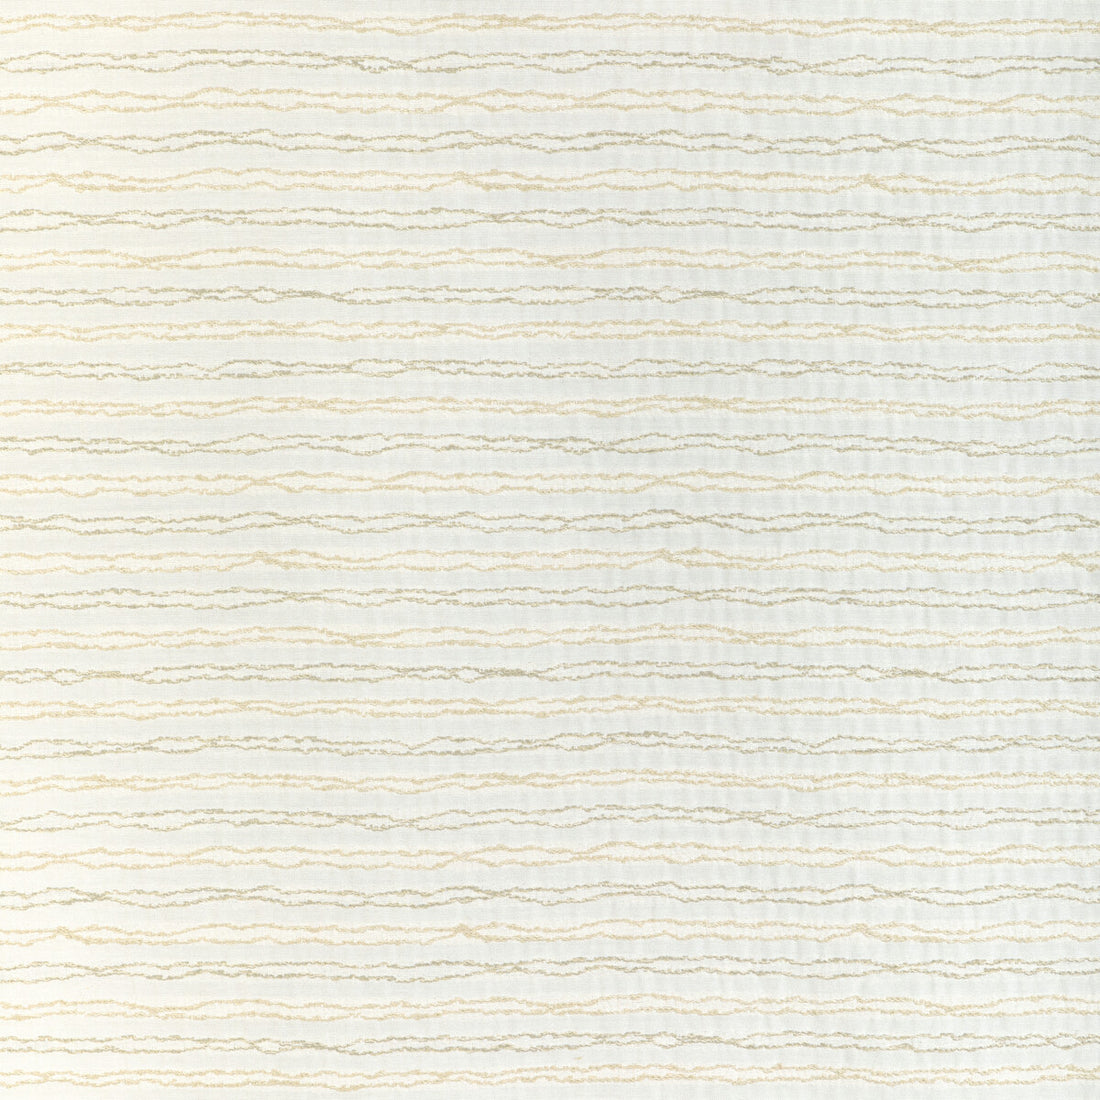 Wave Length fabric in chalk color - pattern 37057.1.0 - by Kravet Design in the Thom Filicia Latitude collection